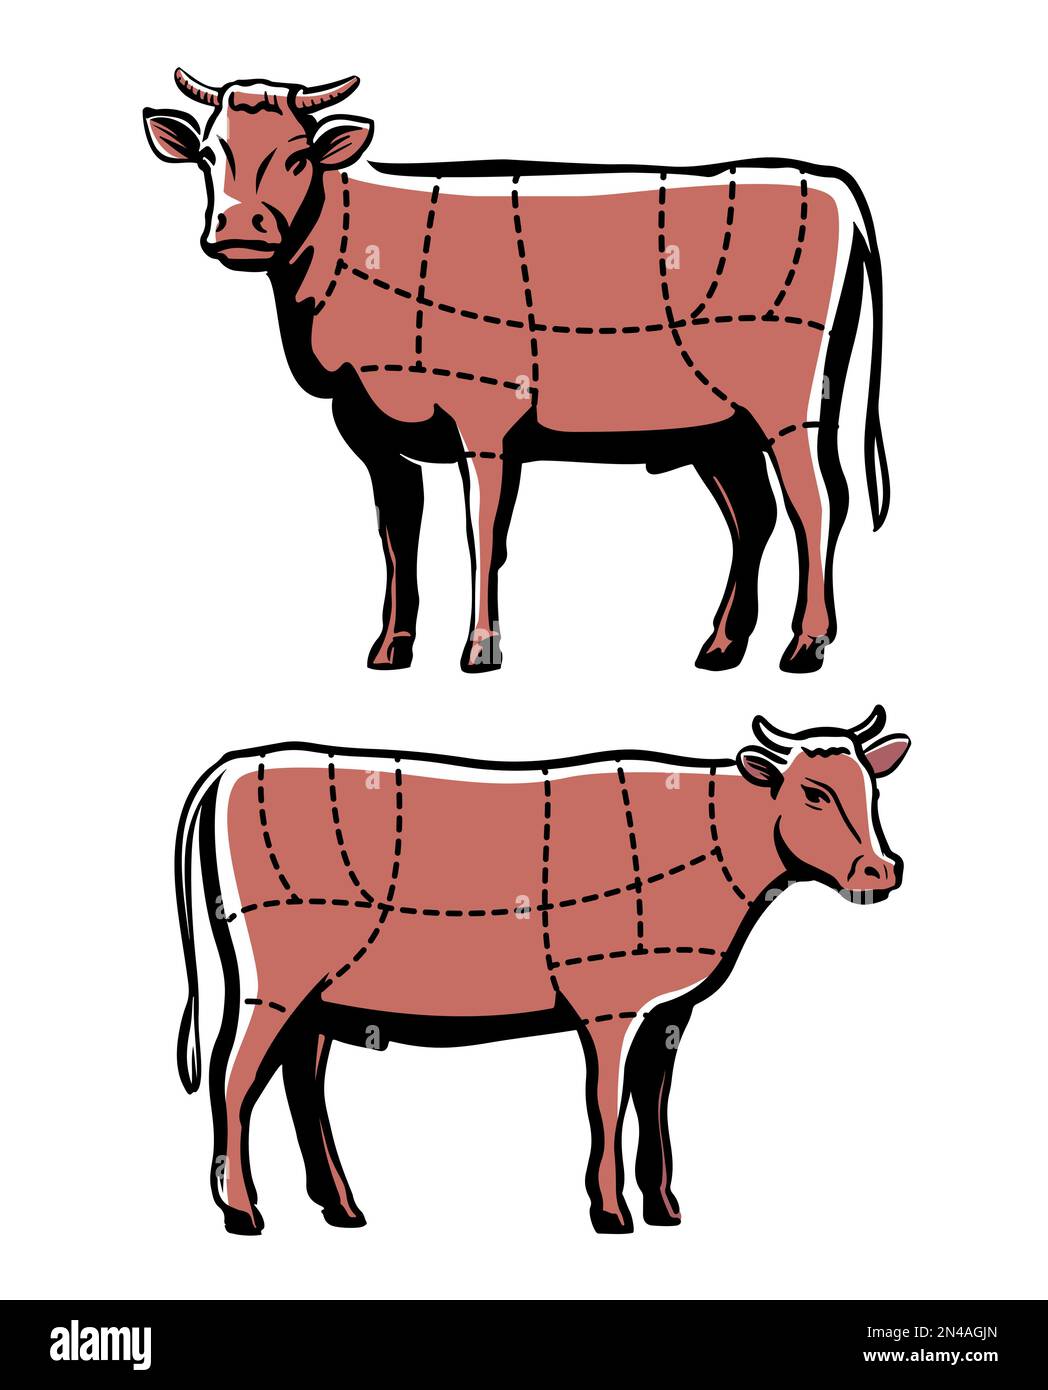 Beef cuts chart. Cow meat cutting diagram for restaurant menu or butcher shop. Farm animal vector illustration Stock Vector